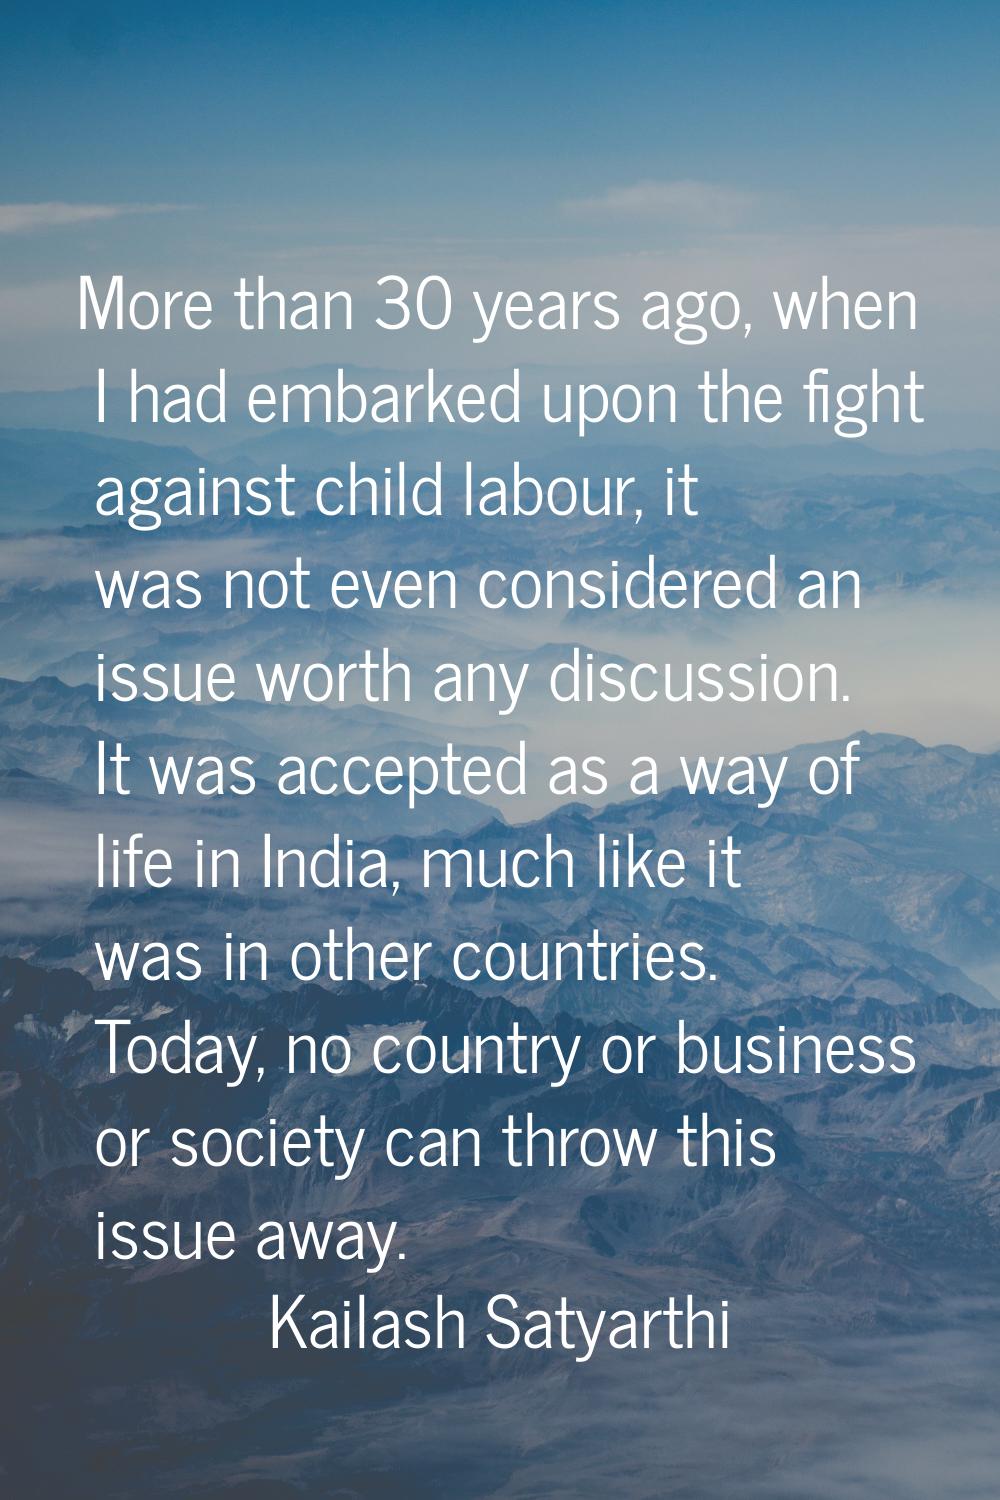 More than 30 years ago, when I had embarked upon the fight against child labour, it was not even co